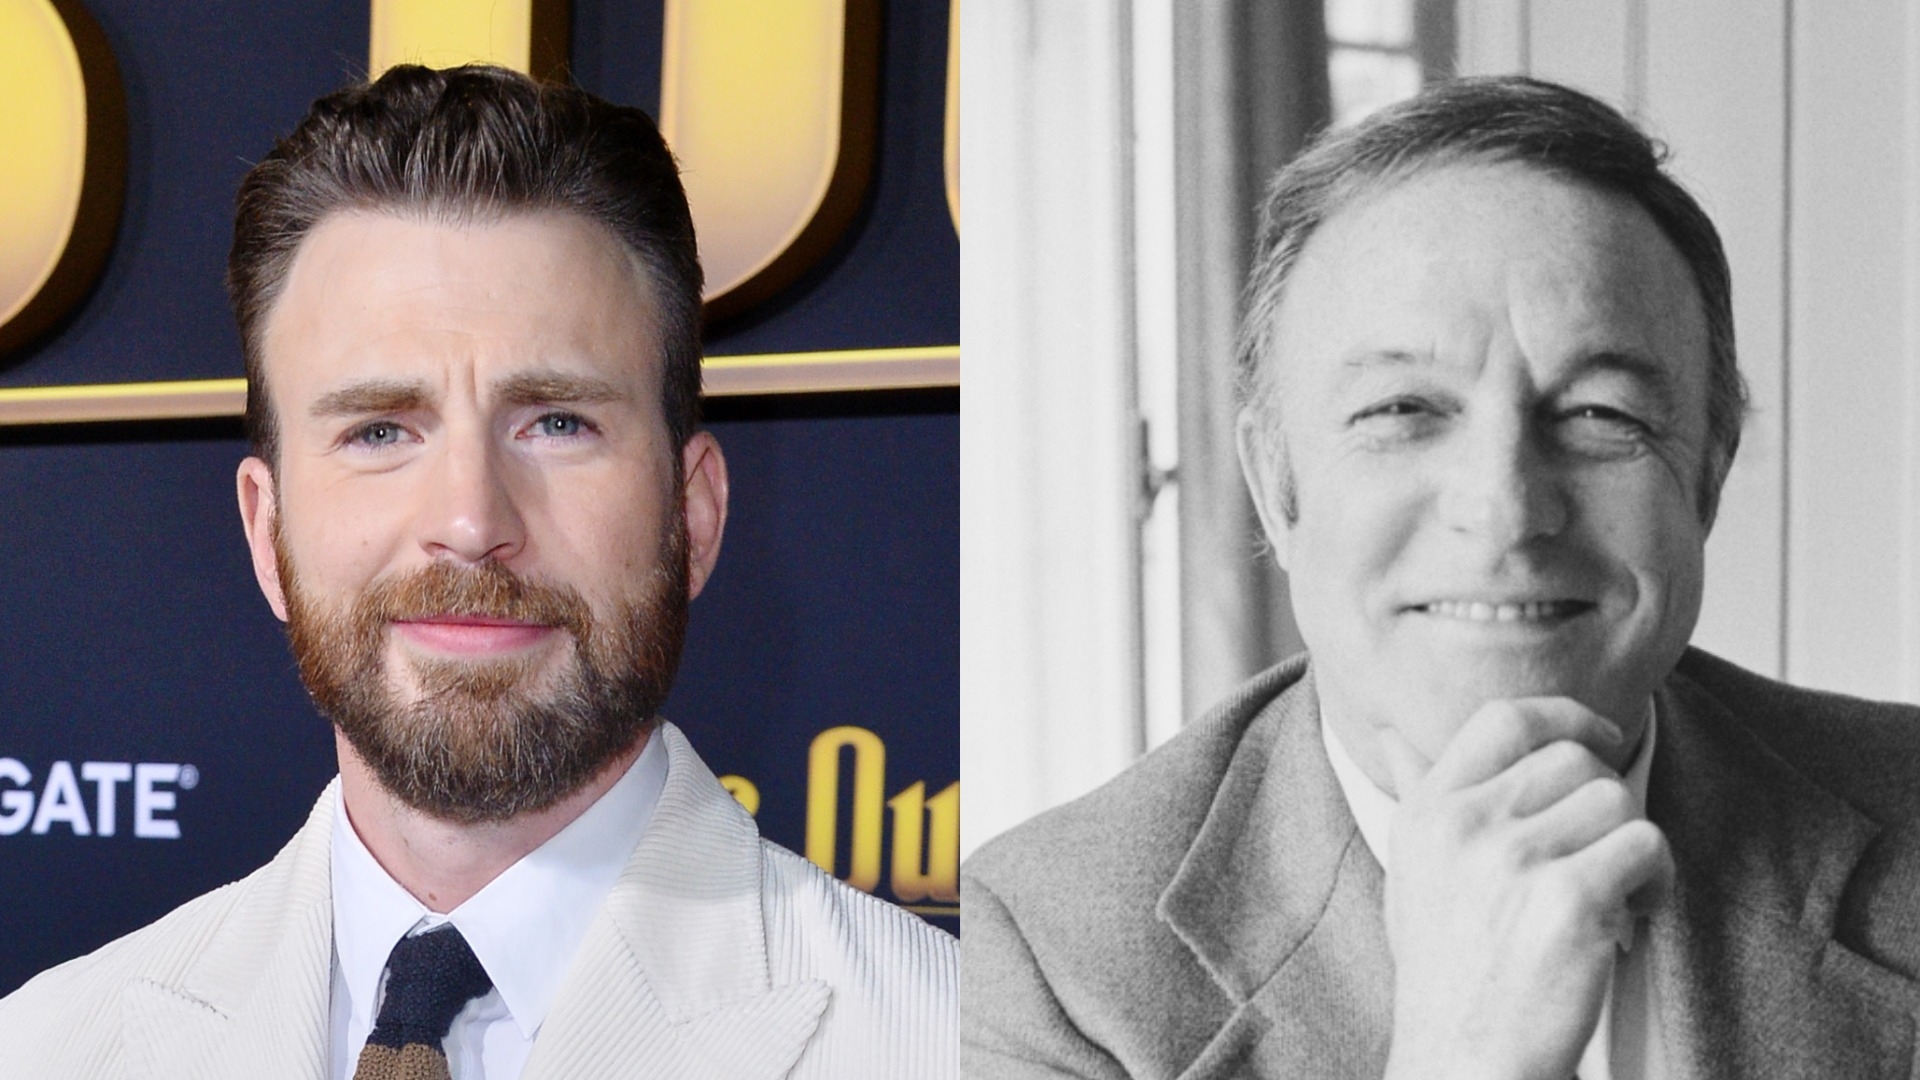 Chris Evans to step into Gene Kelly’s dancing shoes for upcoming film